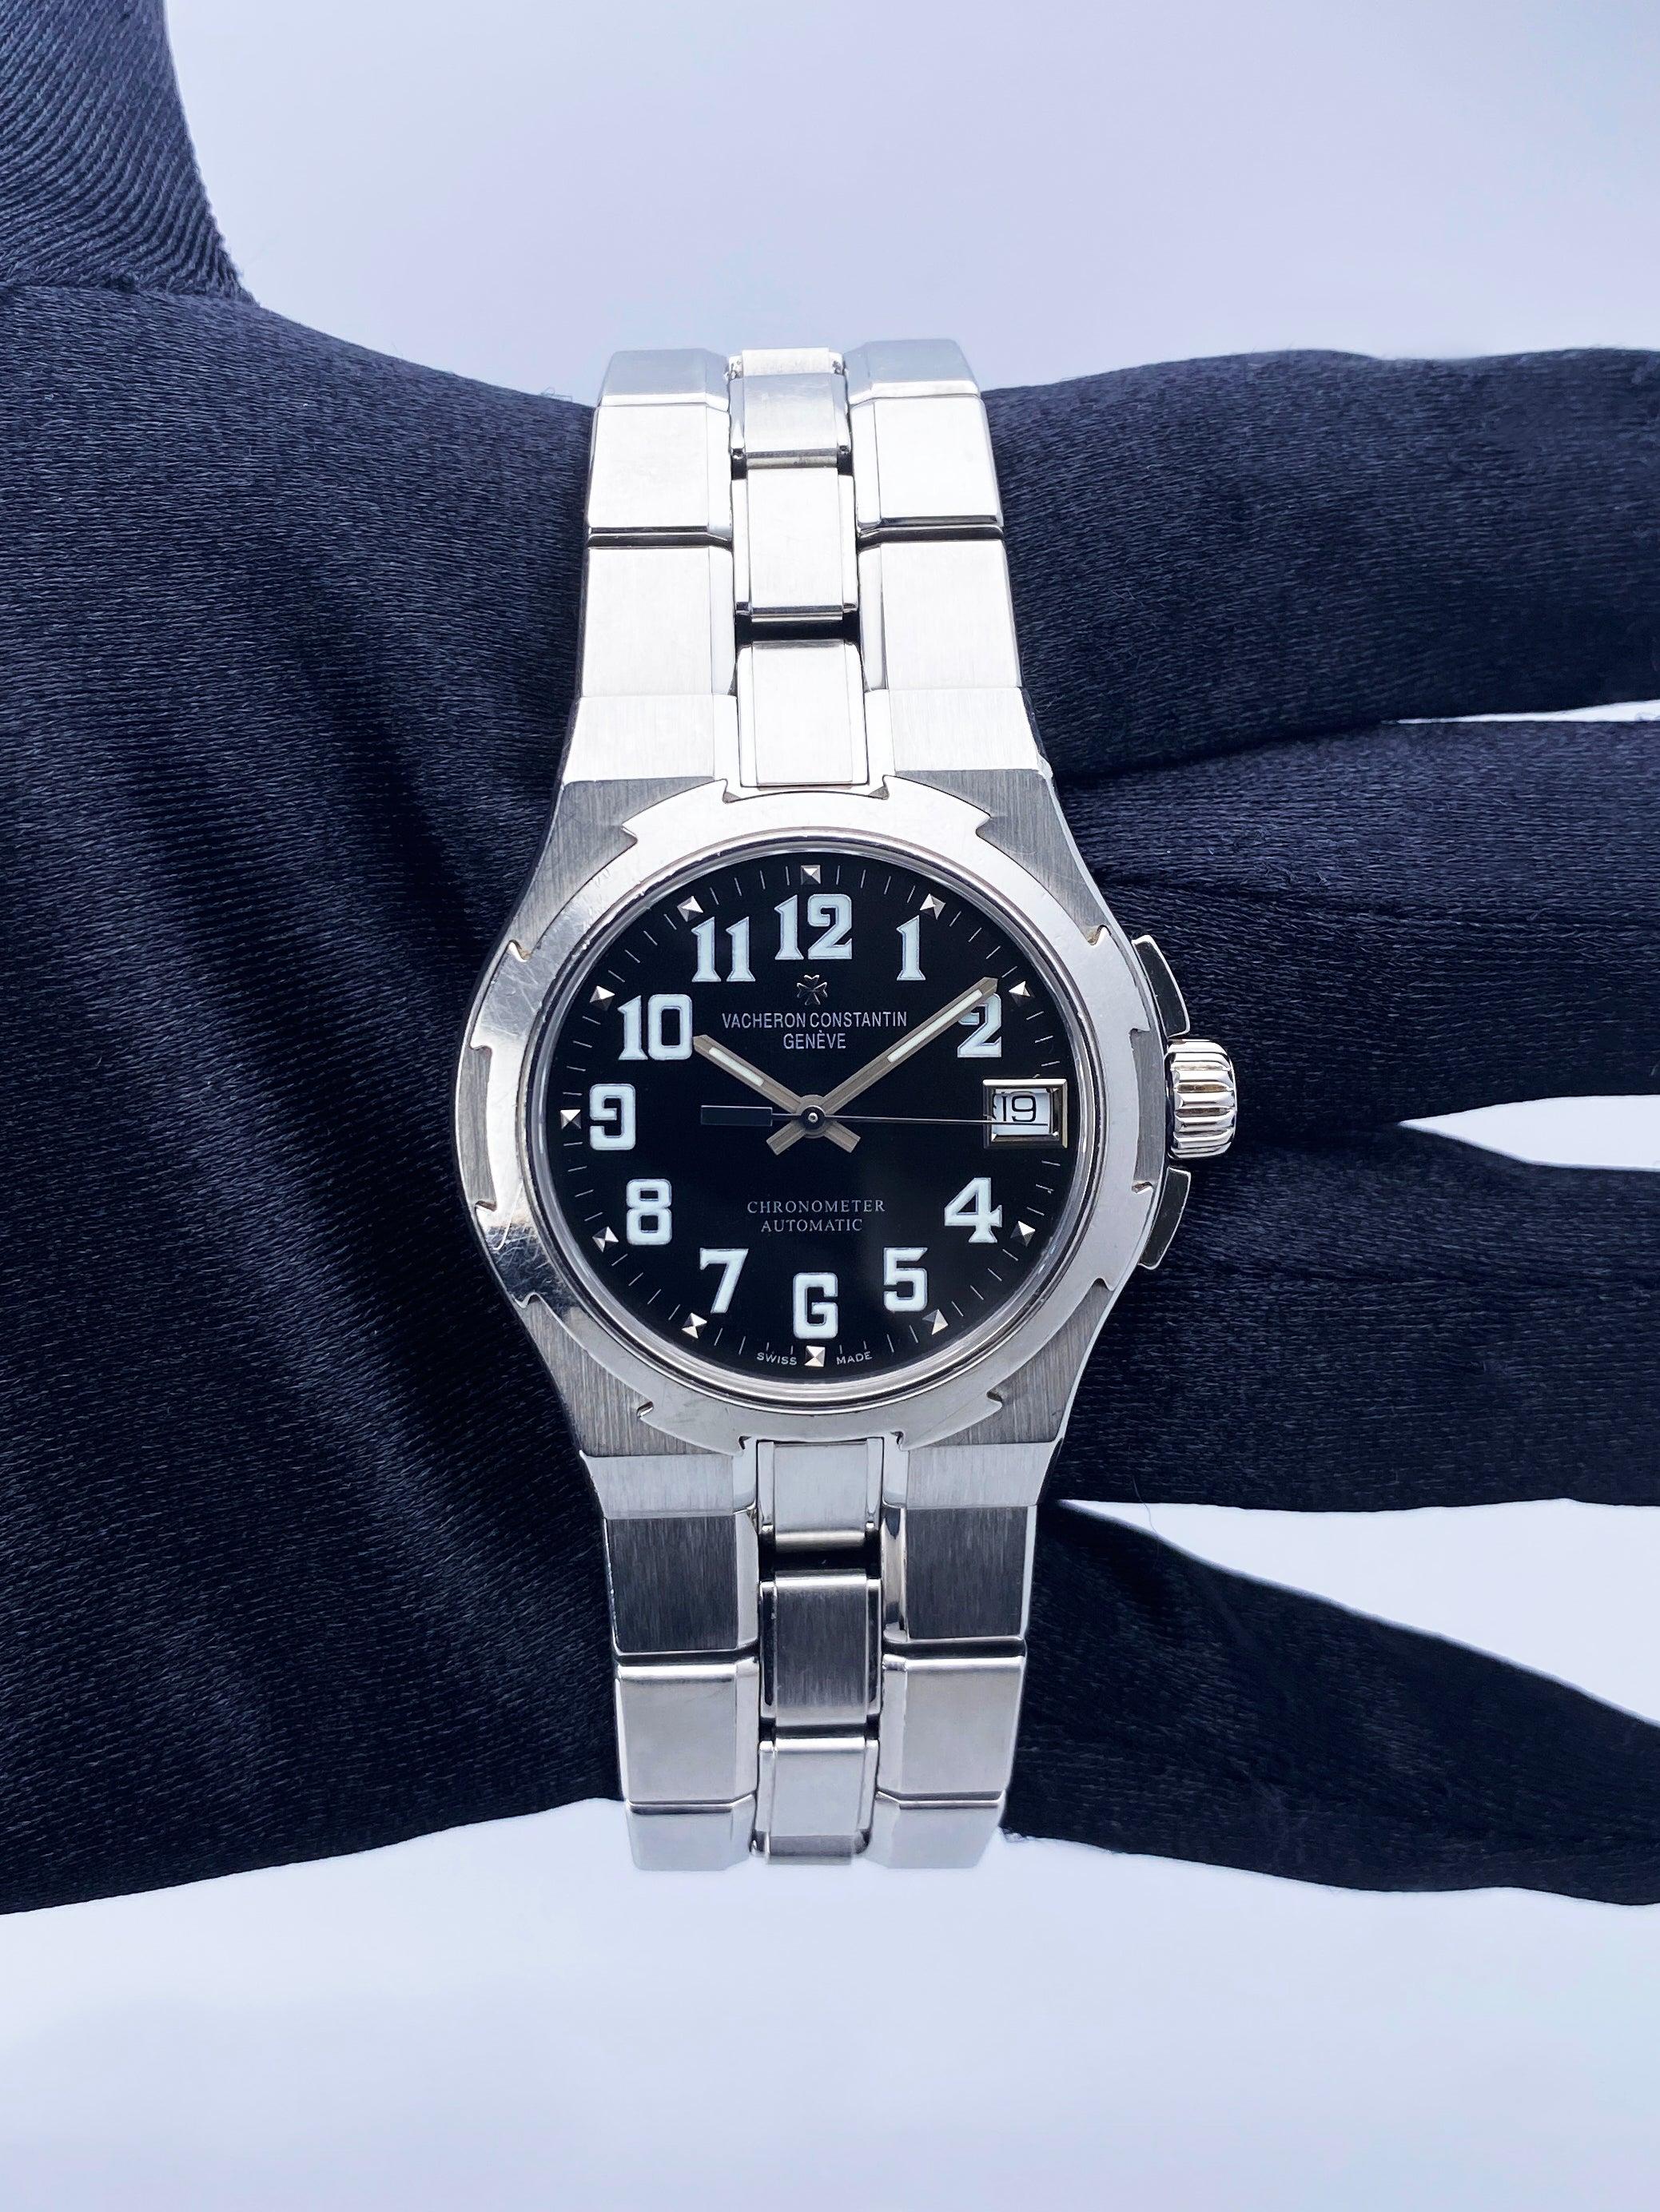 Vacheron Constantin Overseas 42050 Mens Watch. 35mm stainless steel case with stainless steel bezel. Black dial with luminous steel hands and Arabic numeral hour markers. Minute makers on the outer dial. Date display at 3 o'clock position. Stainless